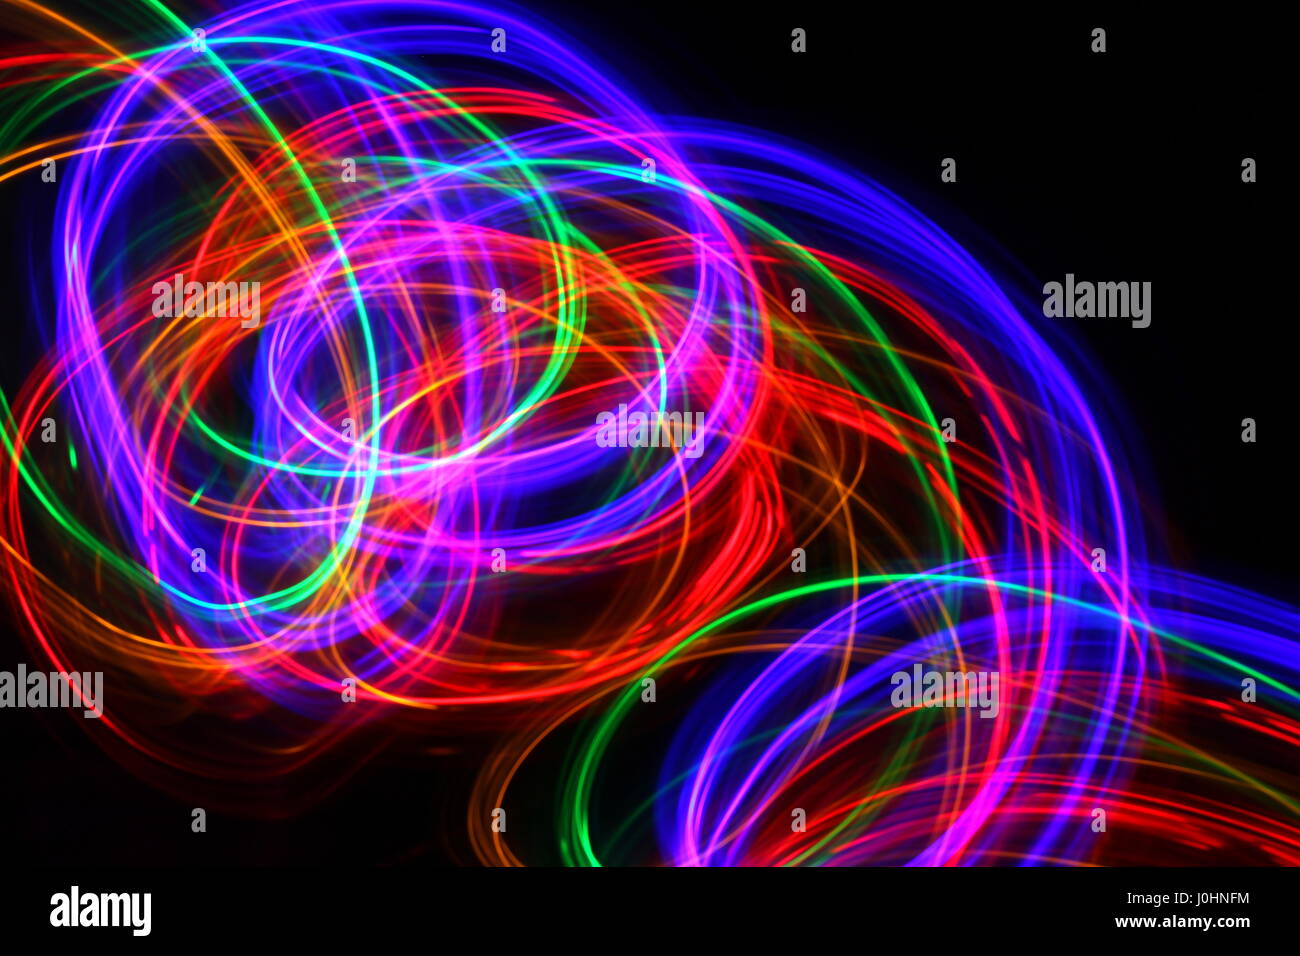 Light painting photograph of multi-coloured fairy lights in a swirl pattern against a black background. Long exposure photography. Neon multi color. Stock Photo